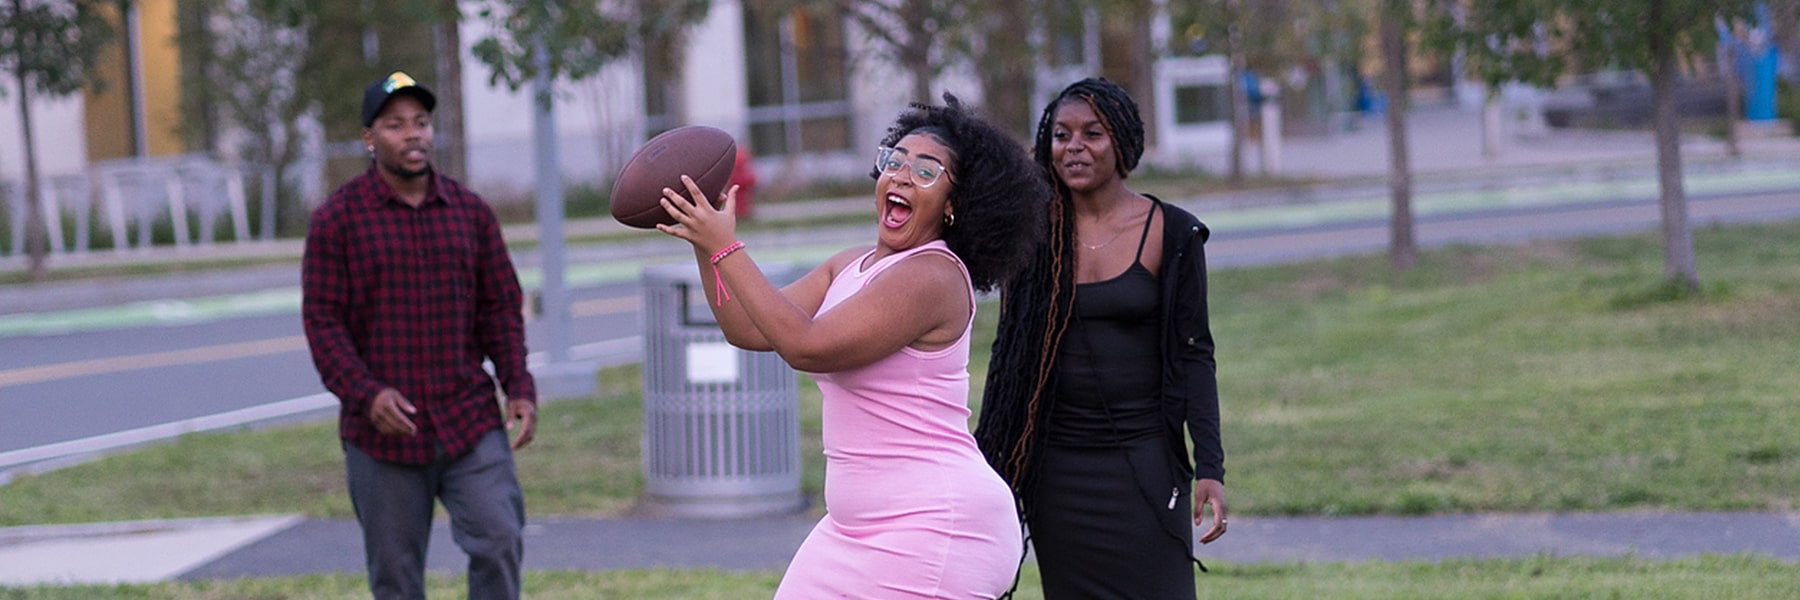 Girl in pink dress catches football at First Friday event Campus Center lawn.